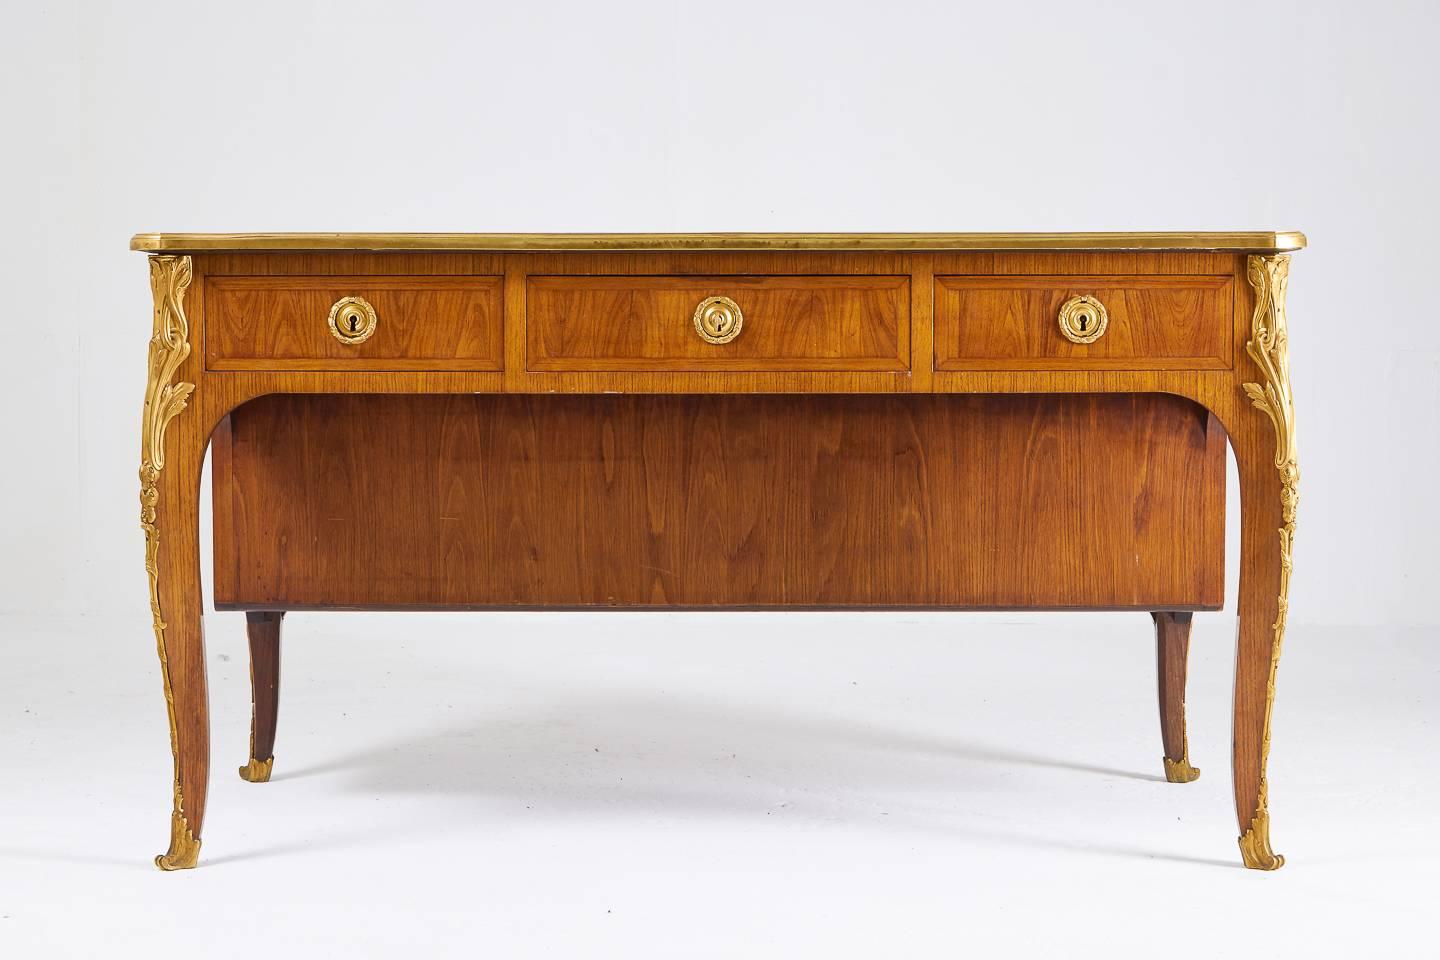 20th Century French 1940s Kingwood and Ormolu Mounted Bureau Plat For Sale